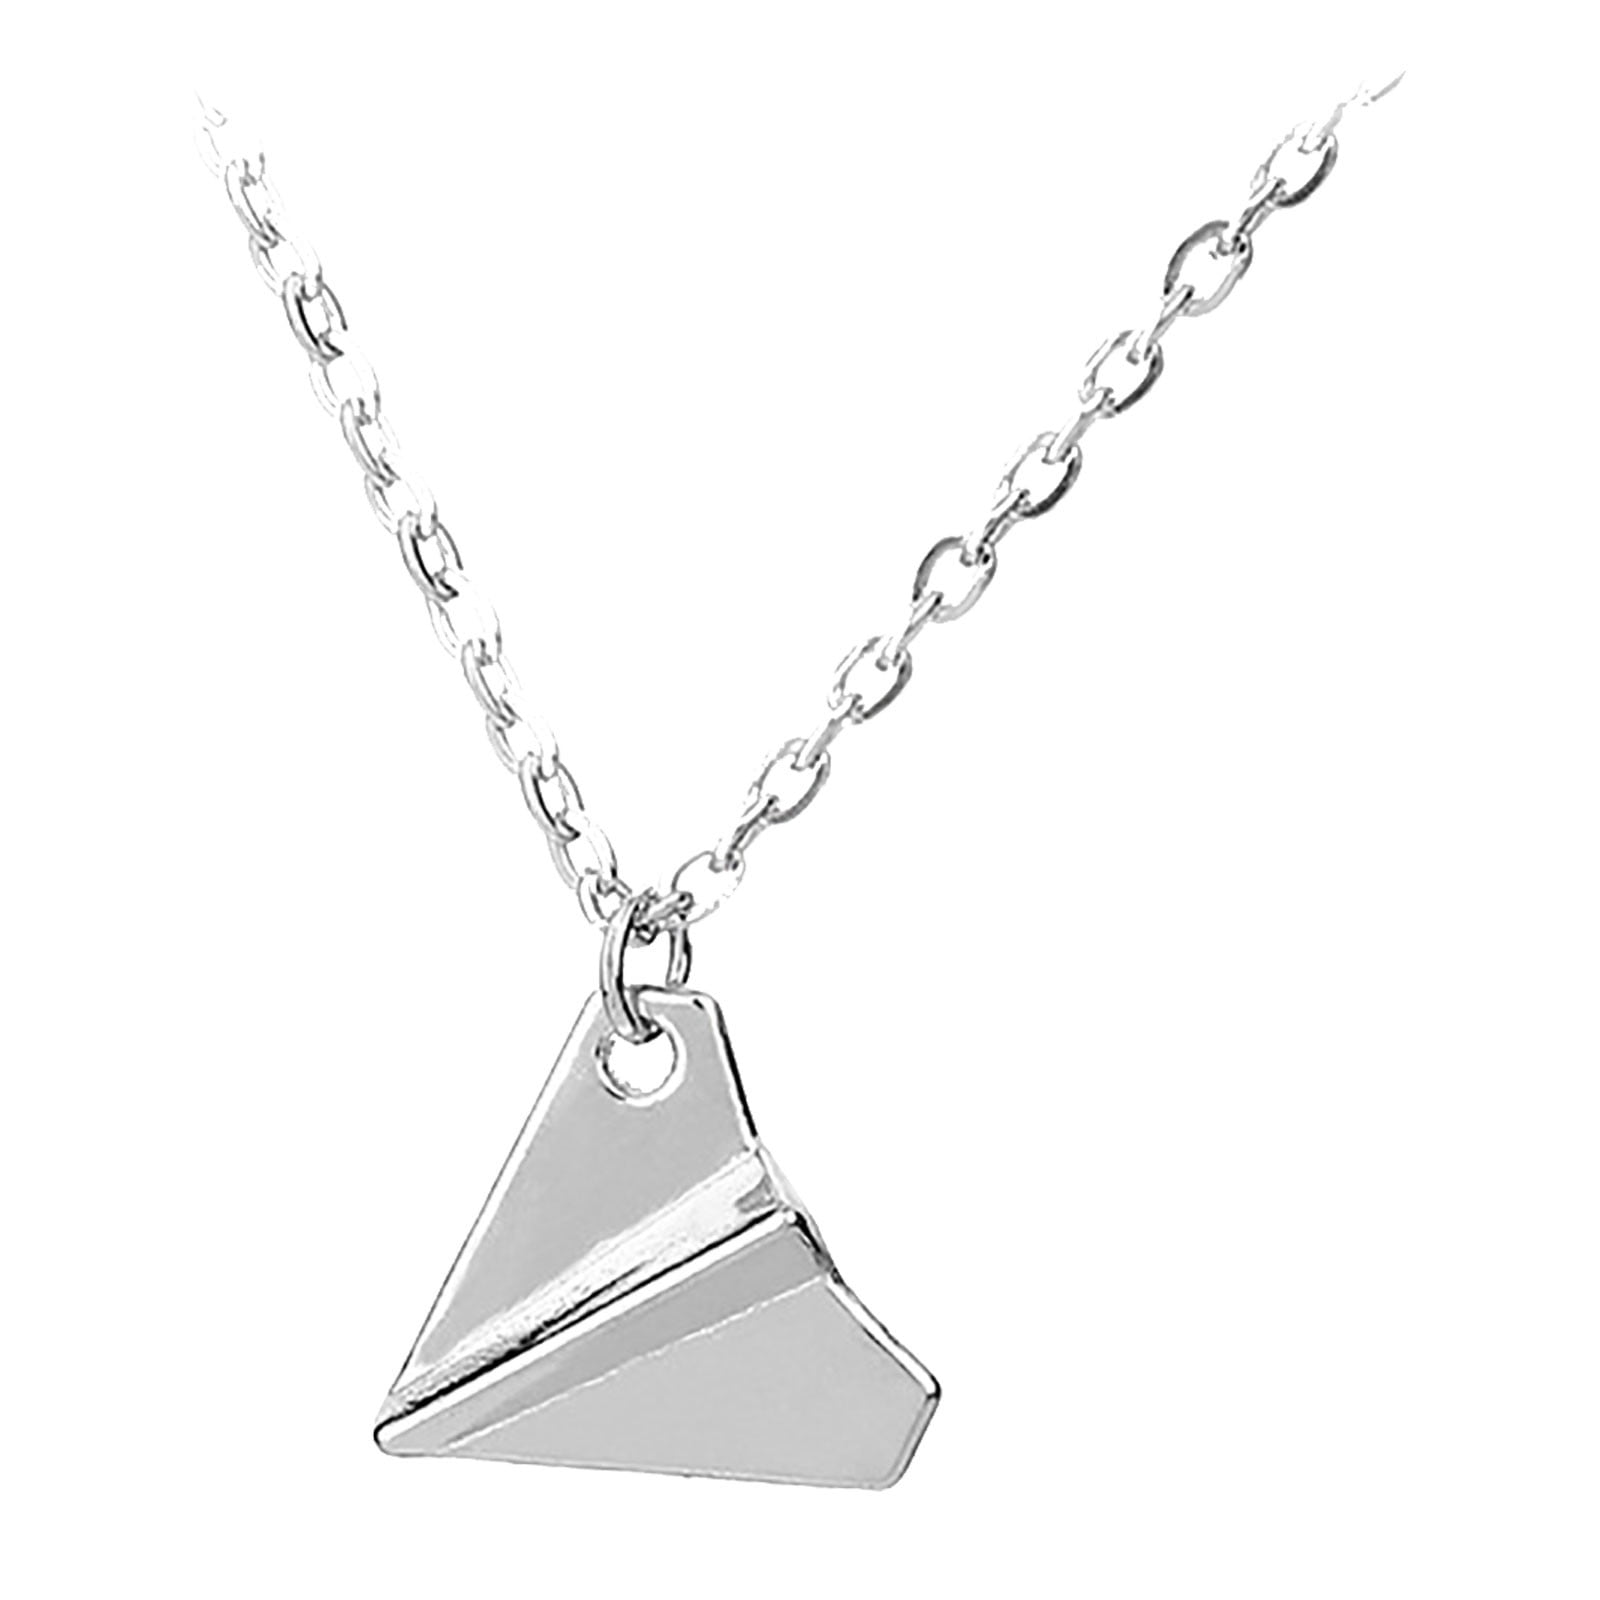 Baocc accessories New Vintage Paper Airplane Necklace Highlights